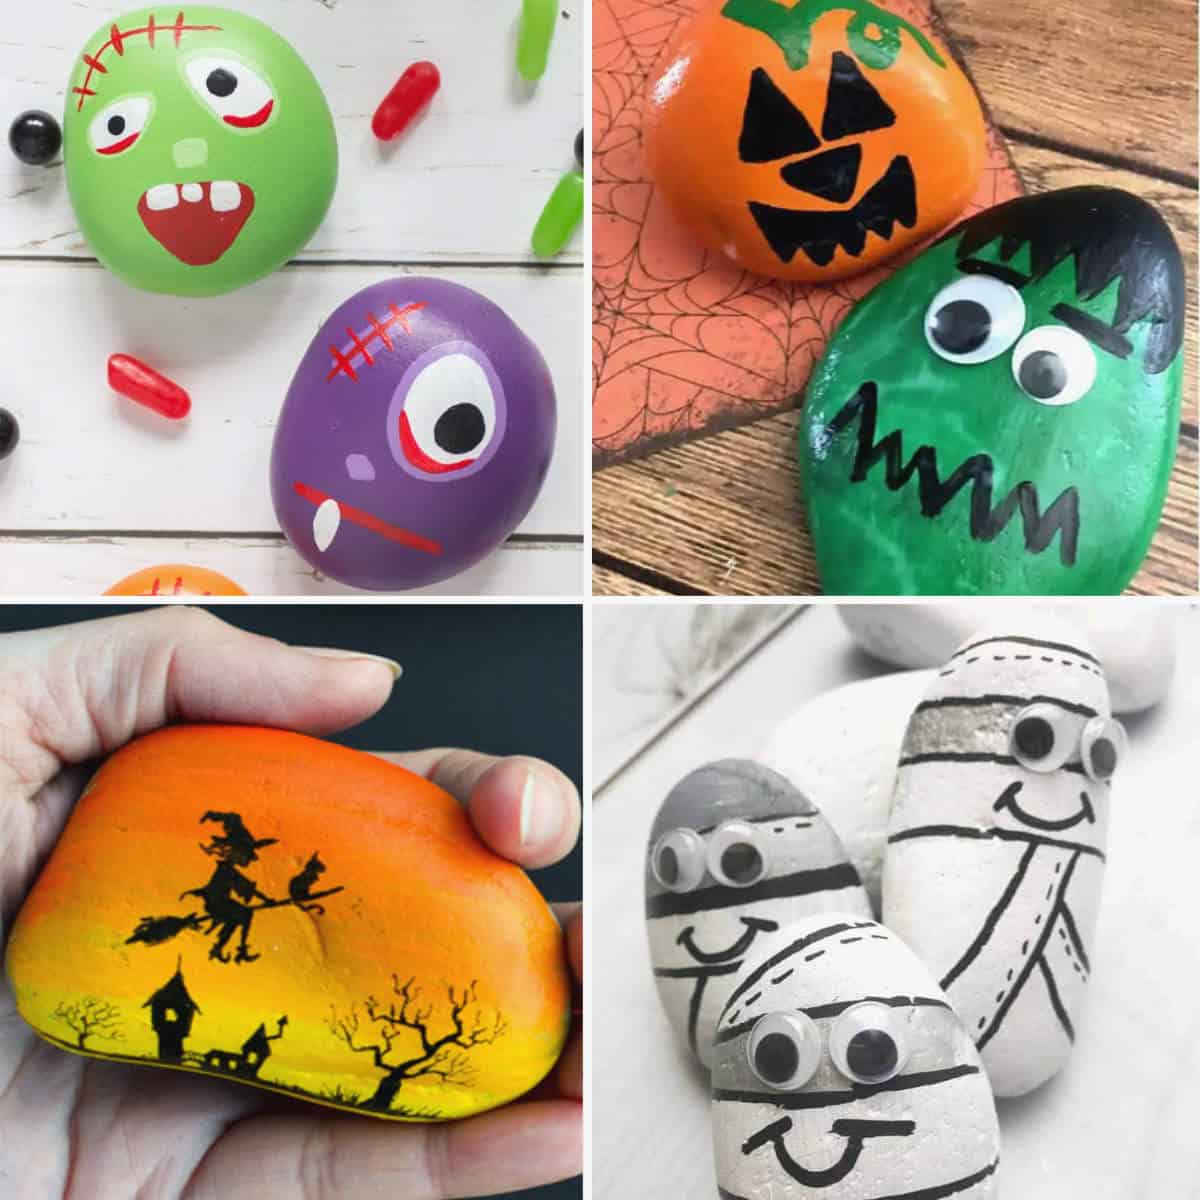 4 different images of rocks with halloween themed characters painted on them